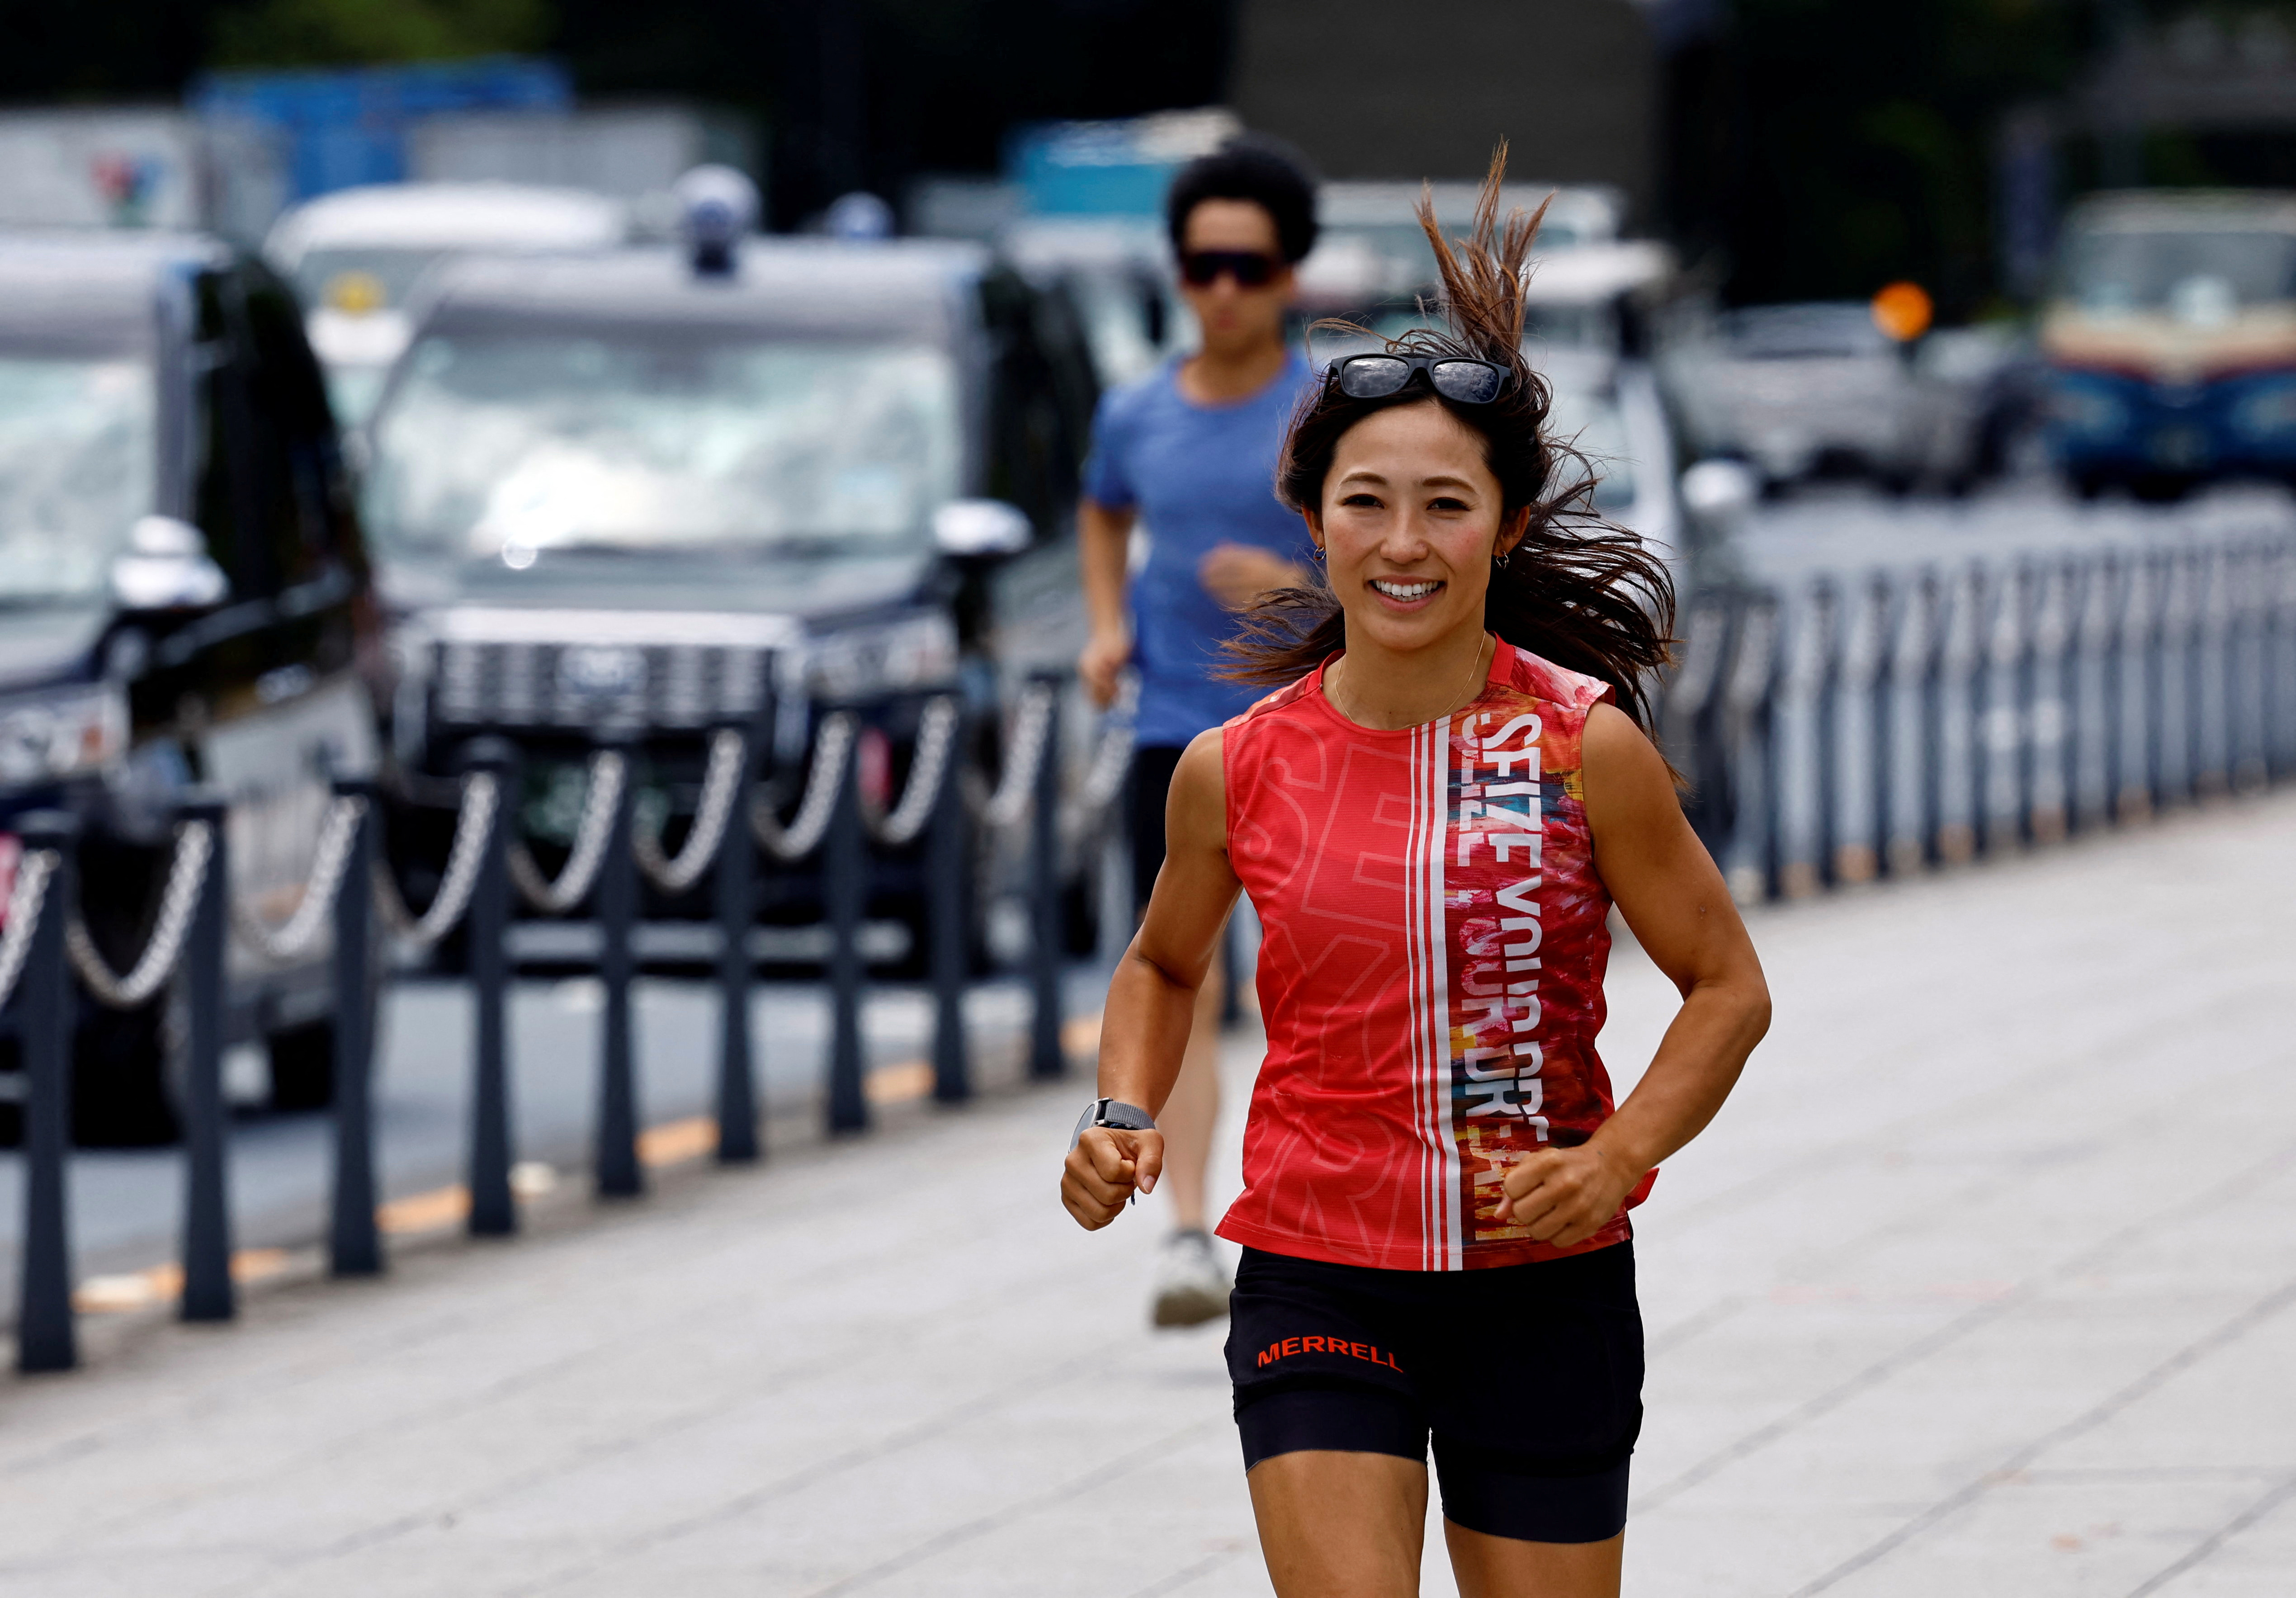 Tomomi Bitoh, Japan's top ultra runner, takes part in a workout session around the Imperial Palace in Tokyo